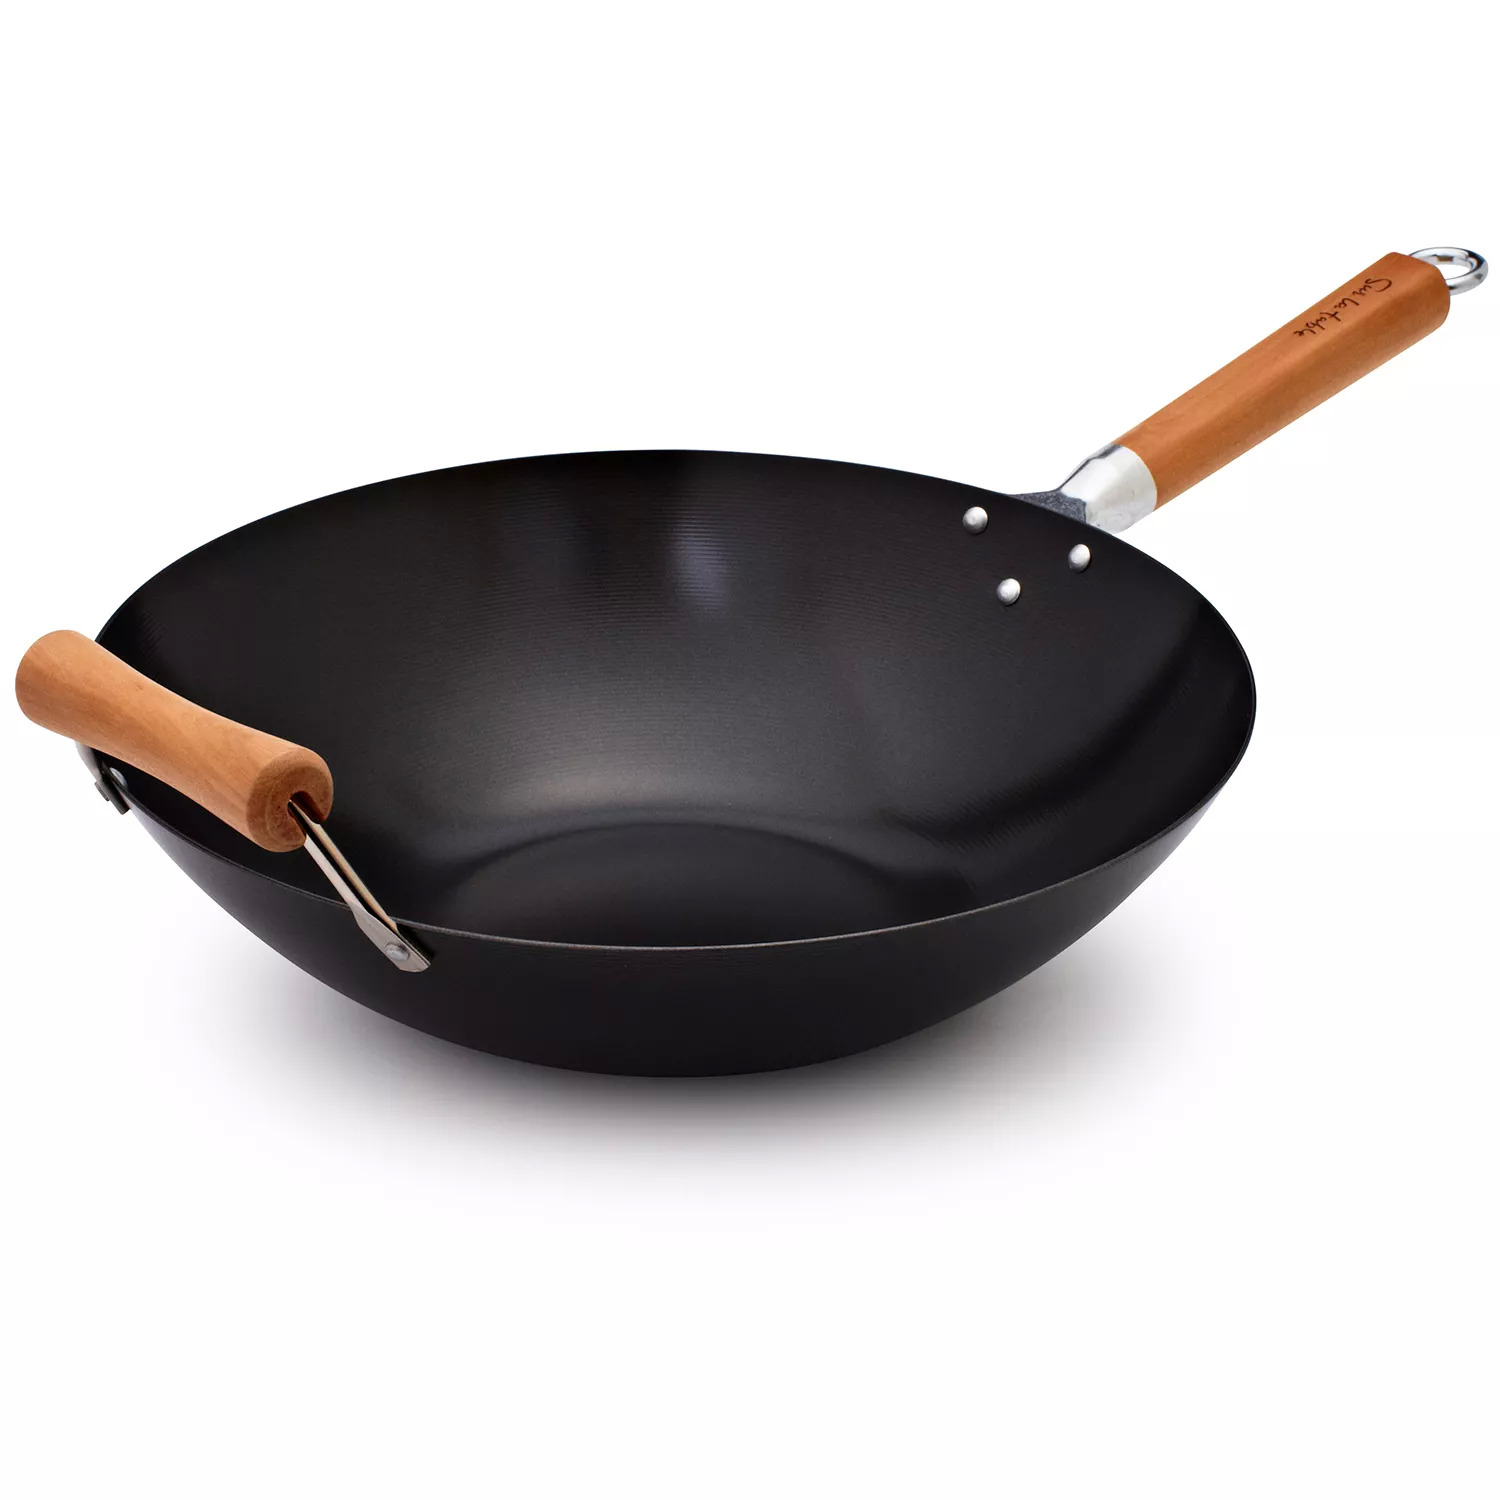 Sur La Table Cookware:10" Enameled Cast Iron Skillet $39.96, 14" Professional Nonstick Wok $34.96 & More + Free Store Pickup at Sur La Table or F/S on $75+